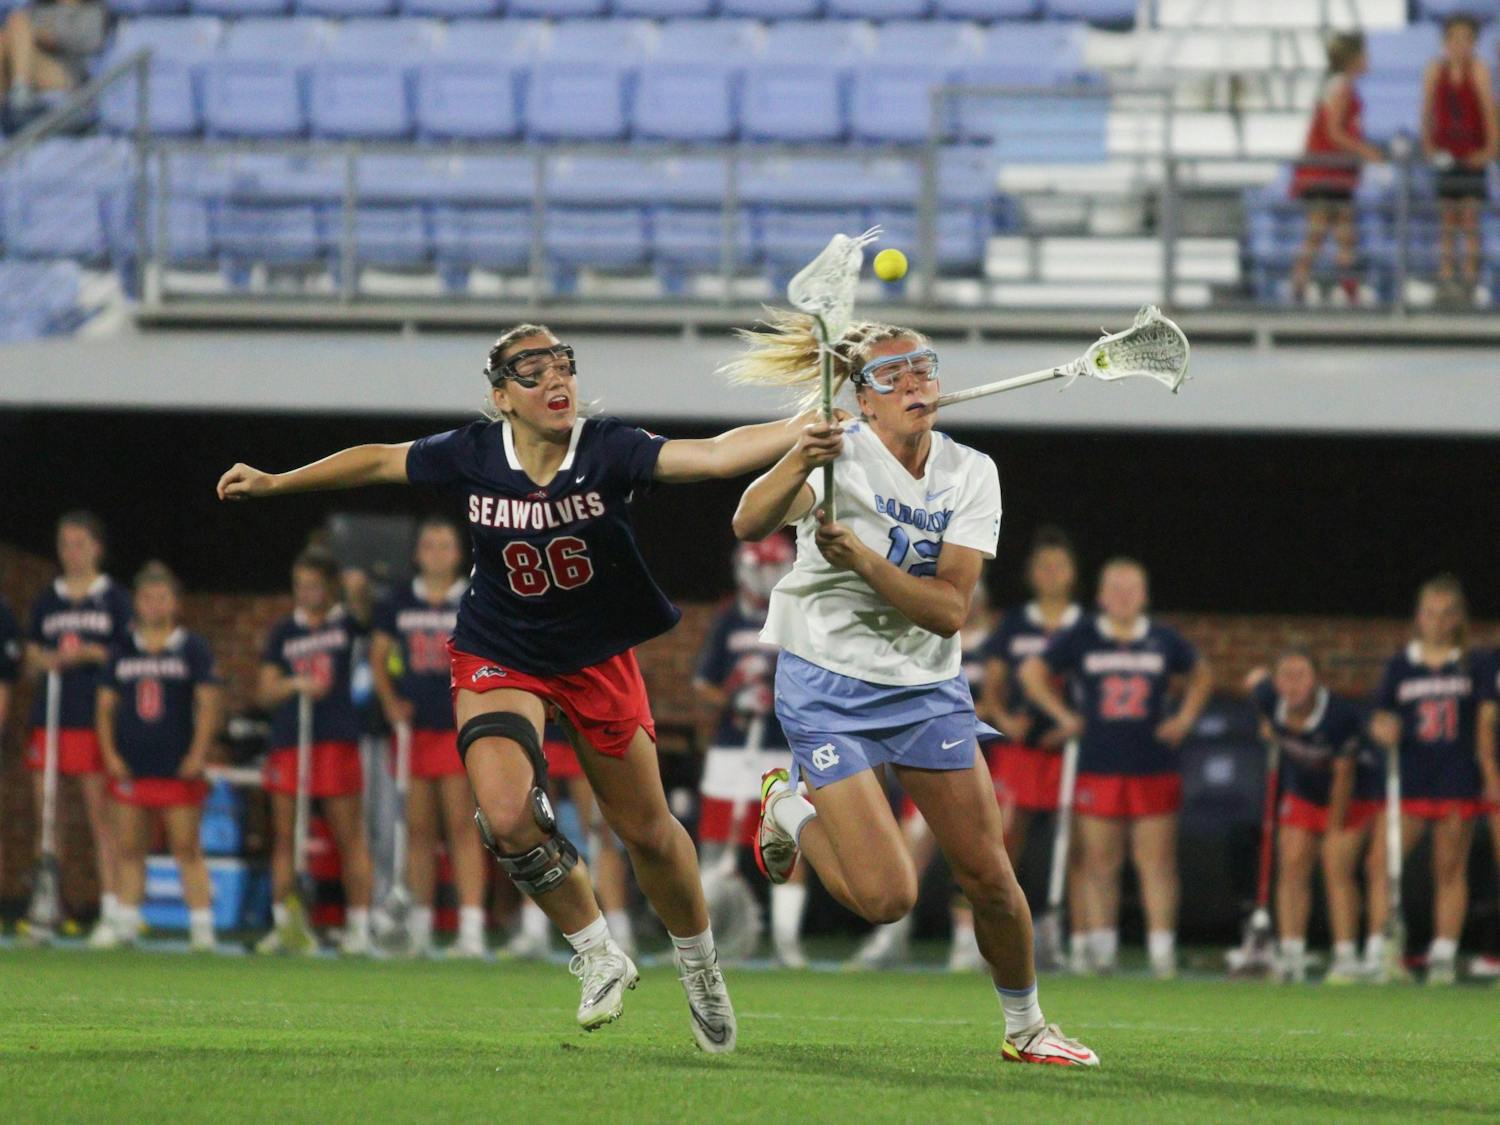 Graduate midfielder Ally Mastroianni (12) flings the ball with Stony Brook defense right behind her. UNC won 8-5 against Stony Brook in the NCAA Quarterfinals at home on Thursday, May 19, 2022.